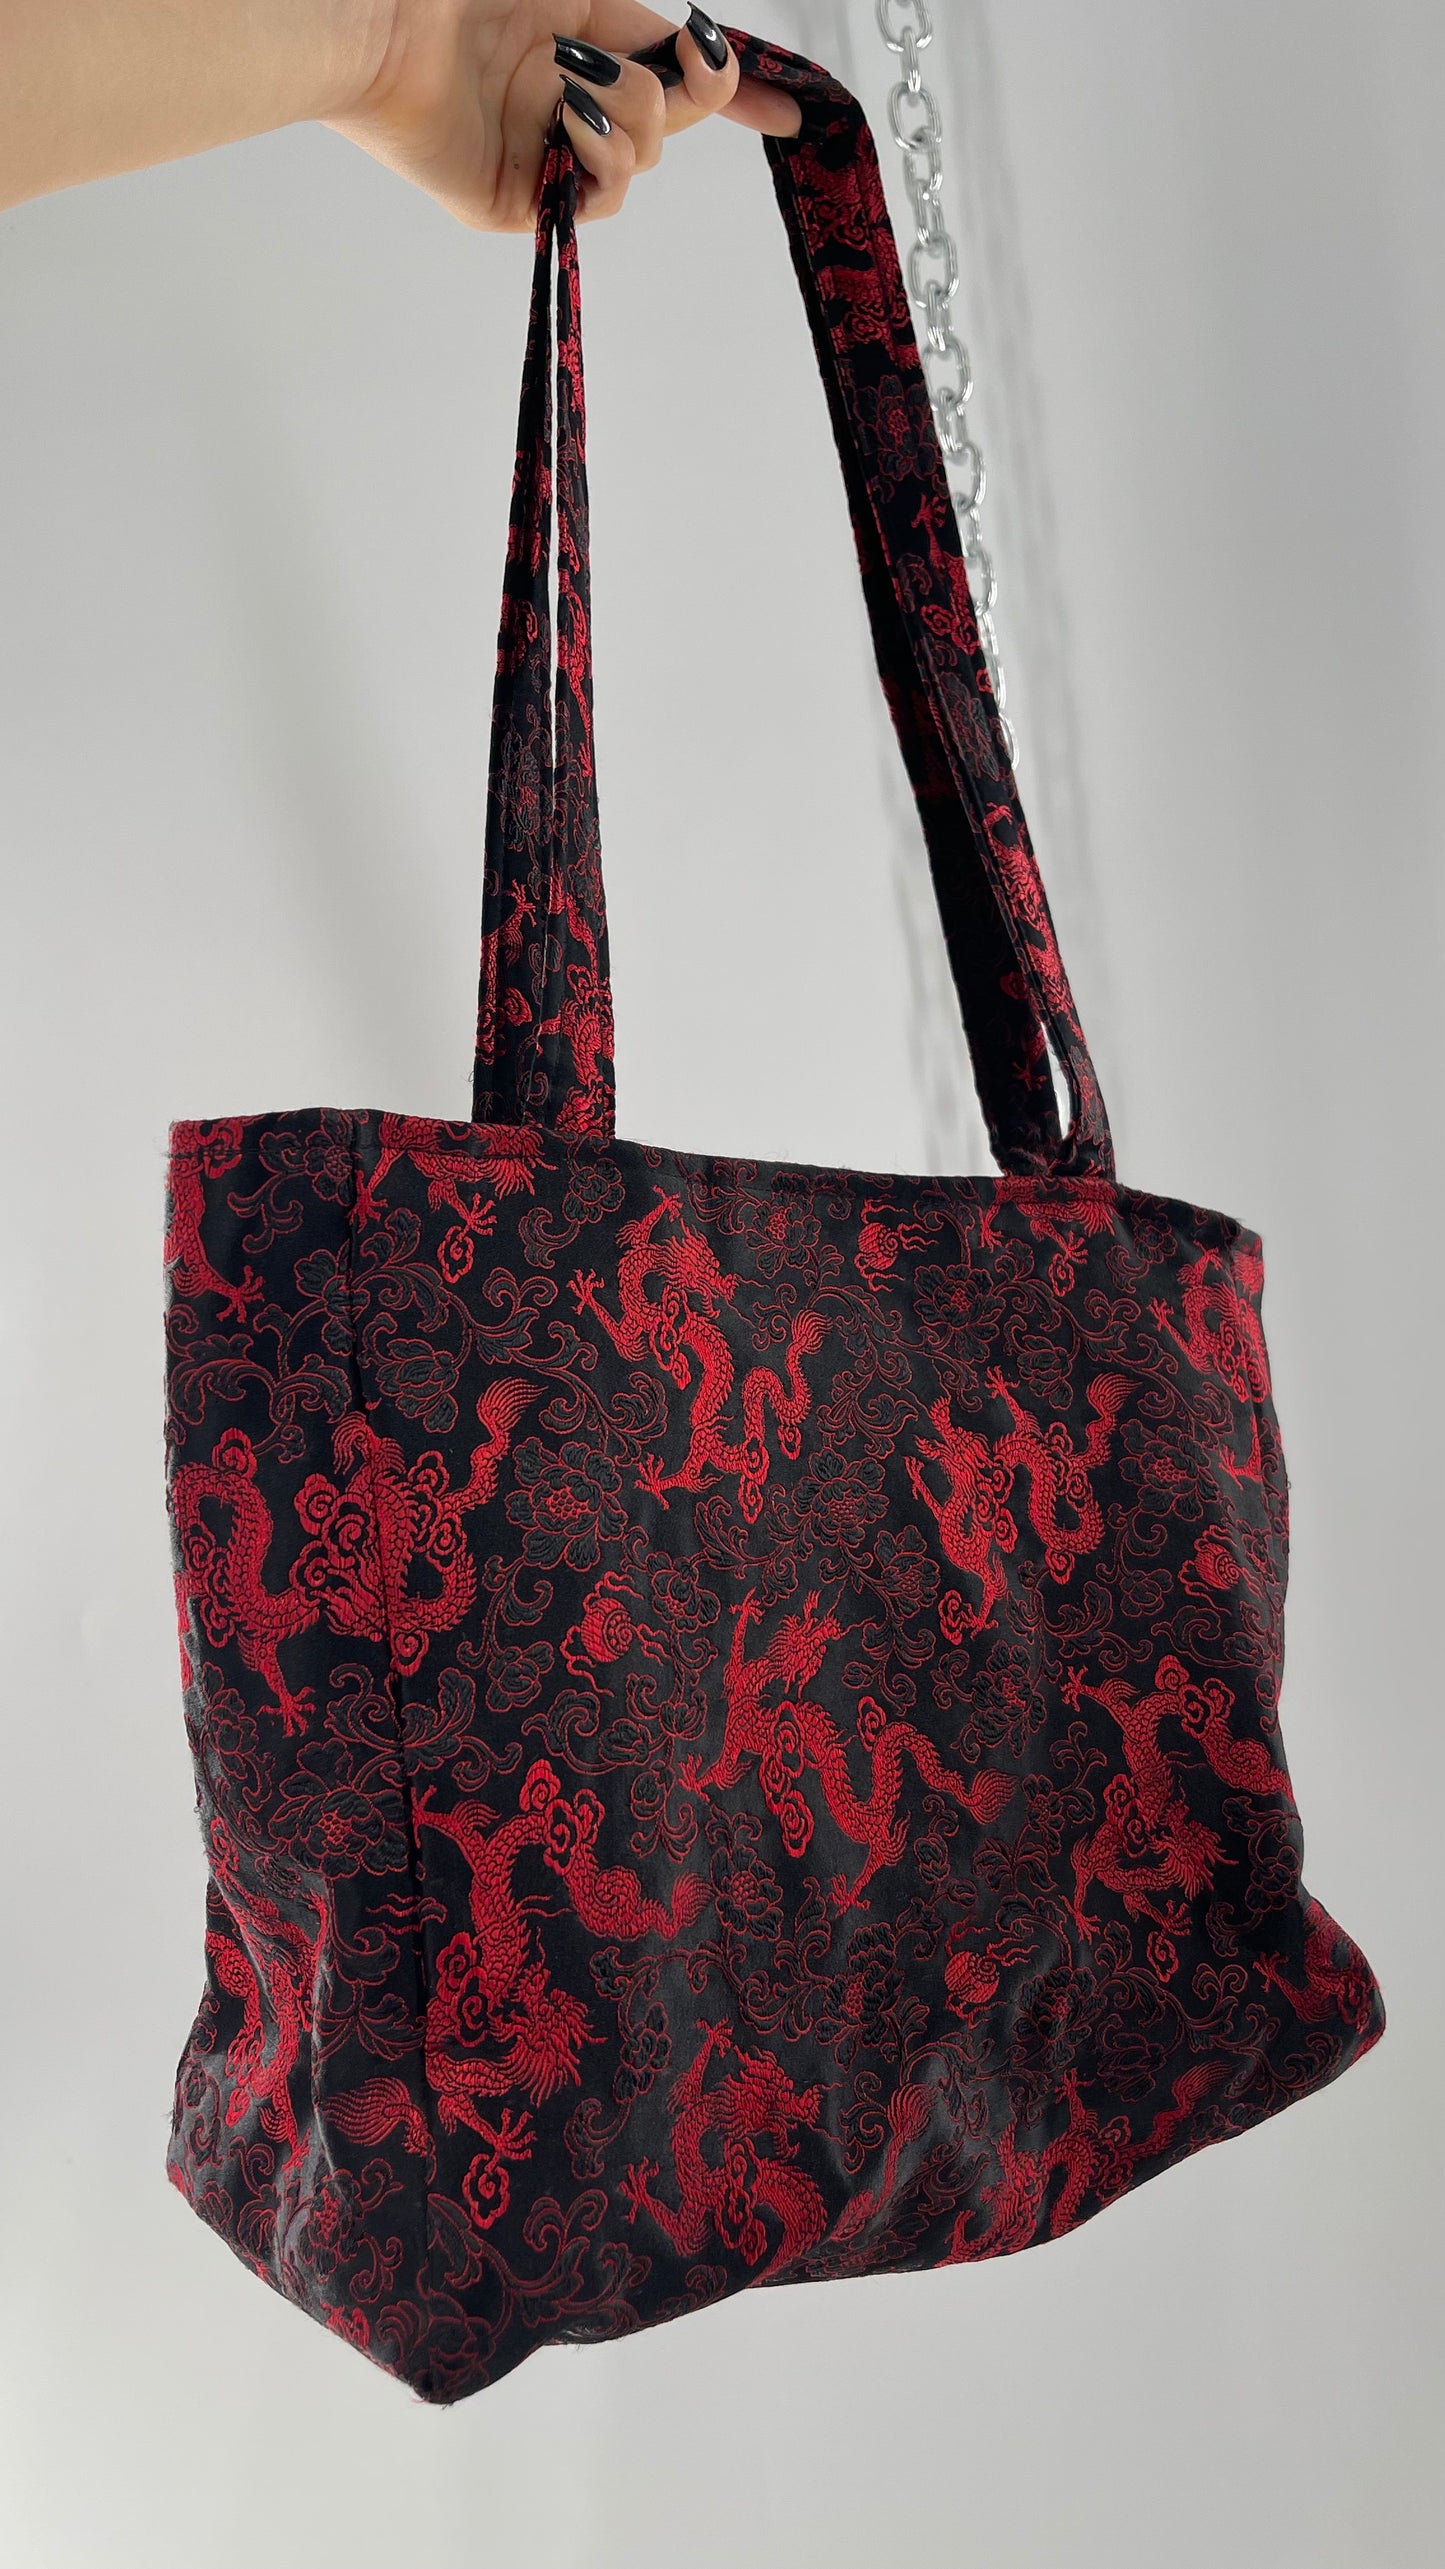 Vintage Black Satin/Silky Tote with Red Dragon/Floral Embroidery